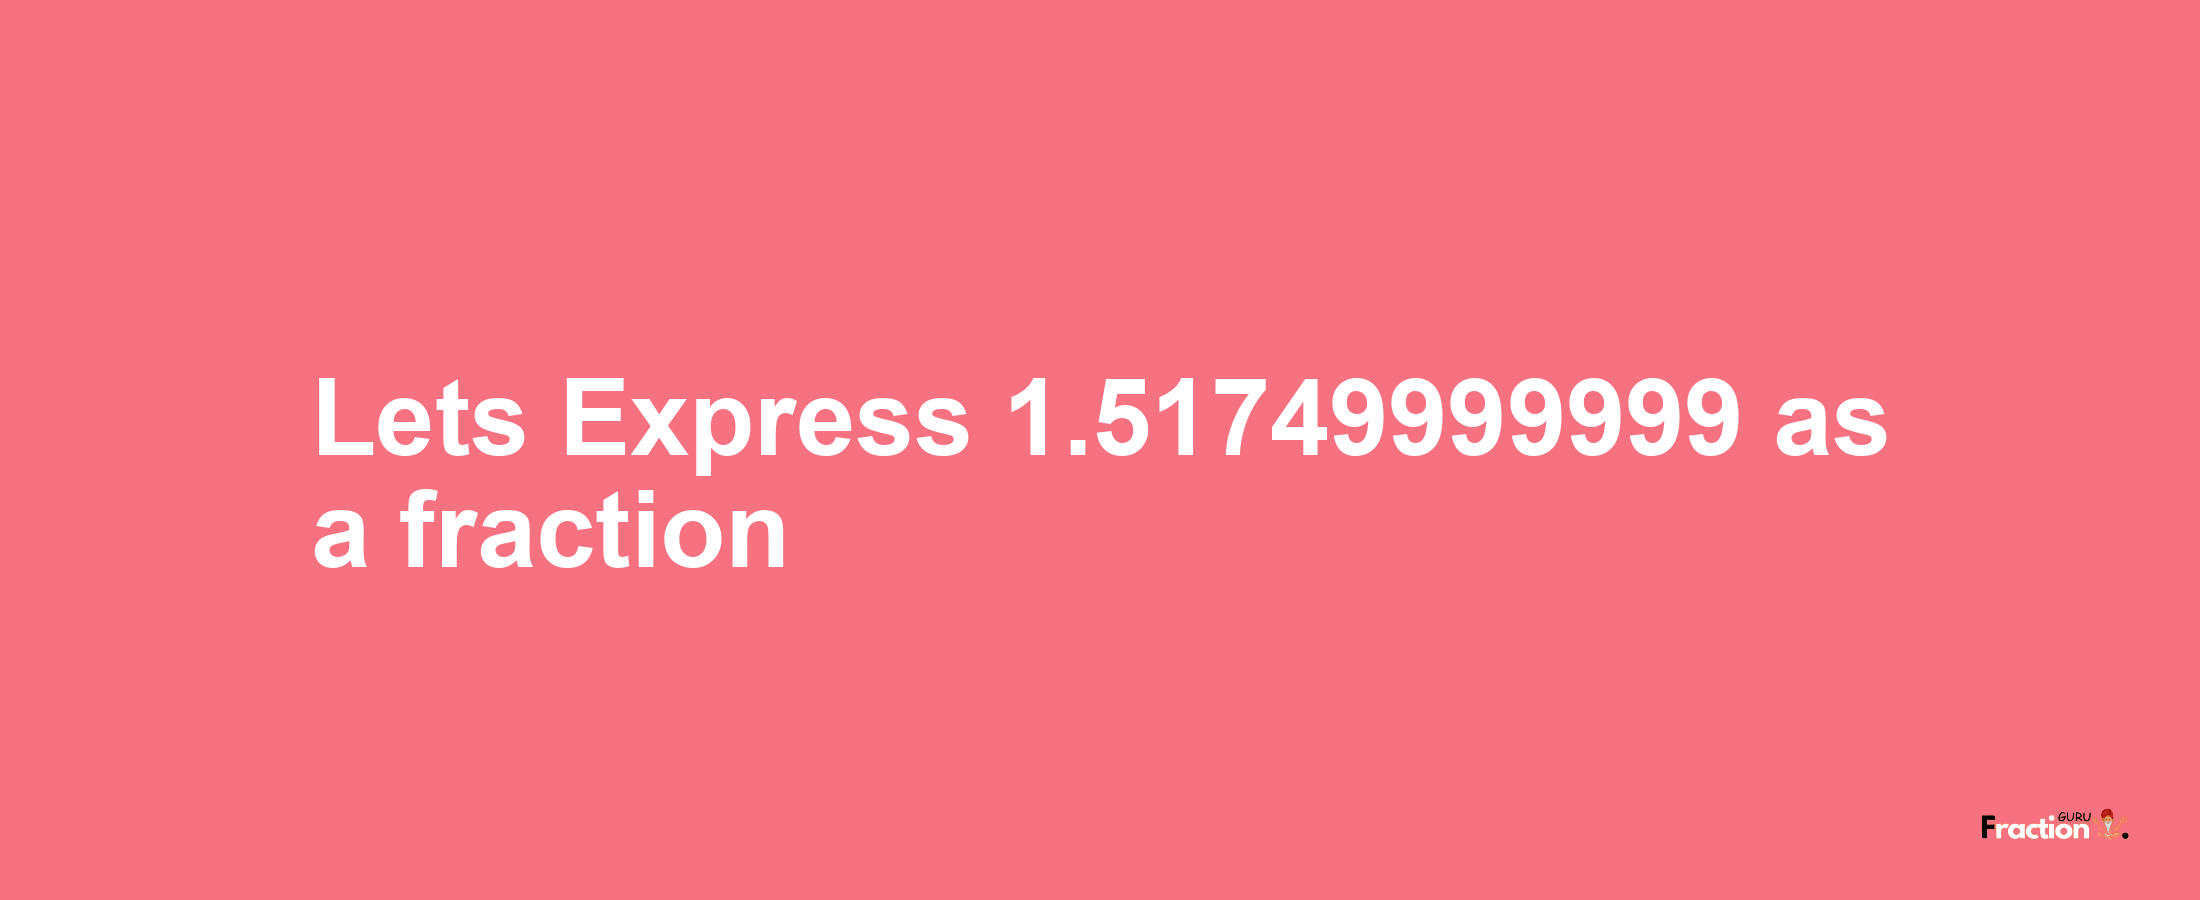 Lets Express 1.51749999999 as afraction